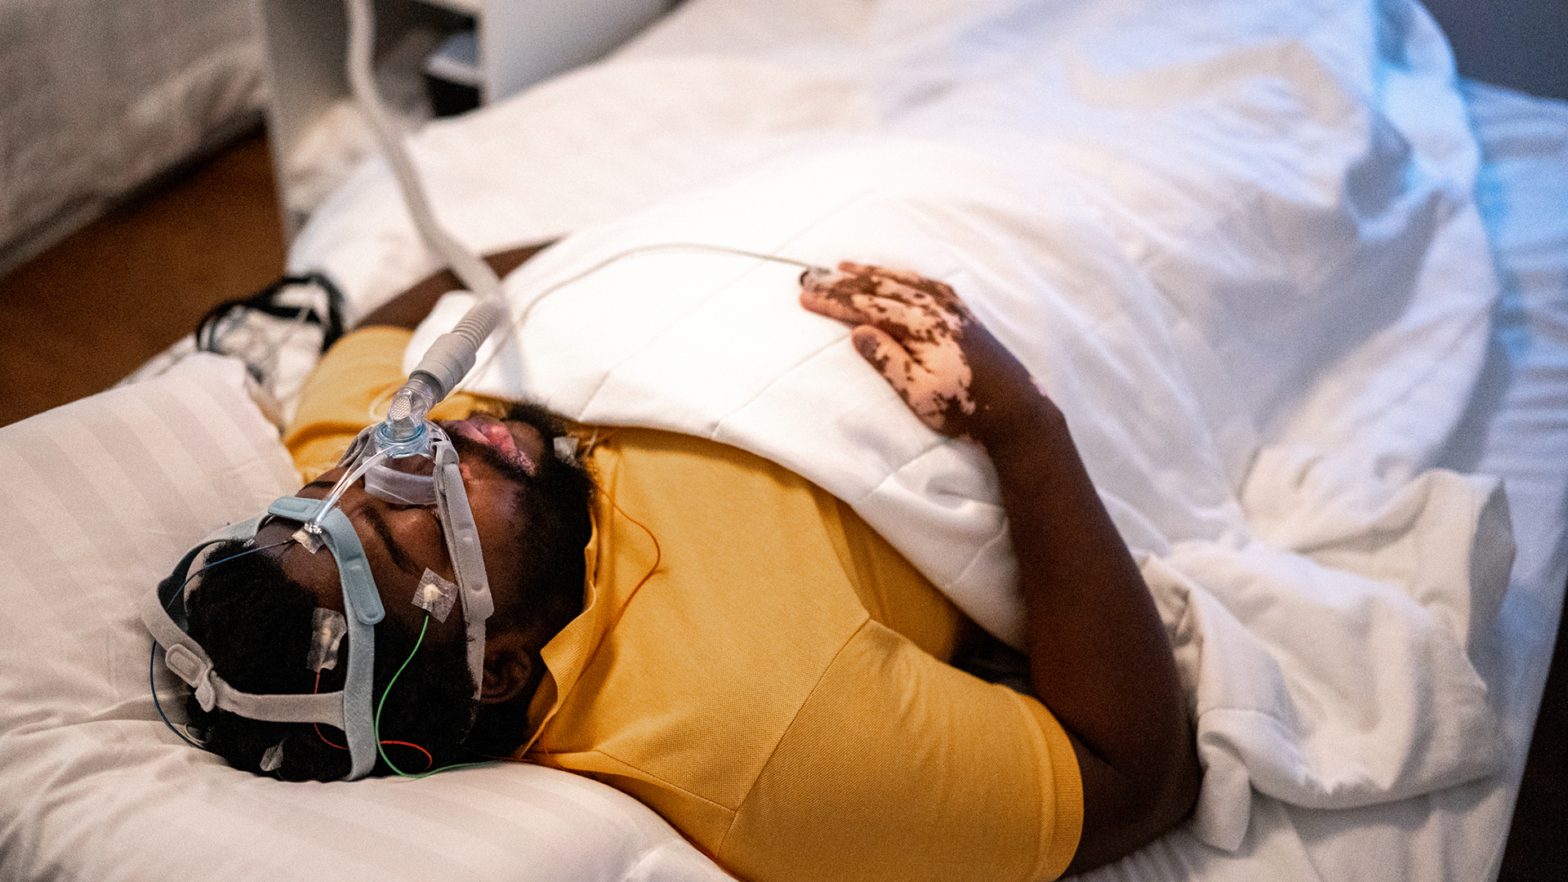 Black Men Are Dying At Increasing Rates From Sleep Apnea Compared To Their White Counterparts, Study Finds